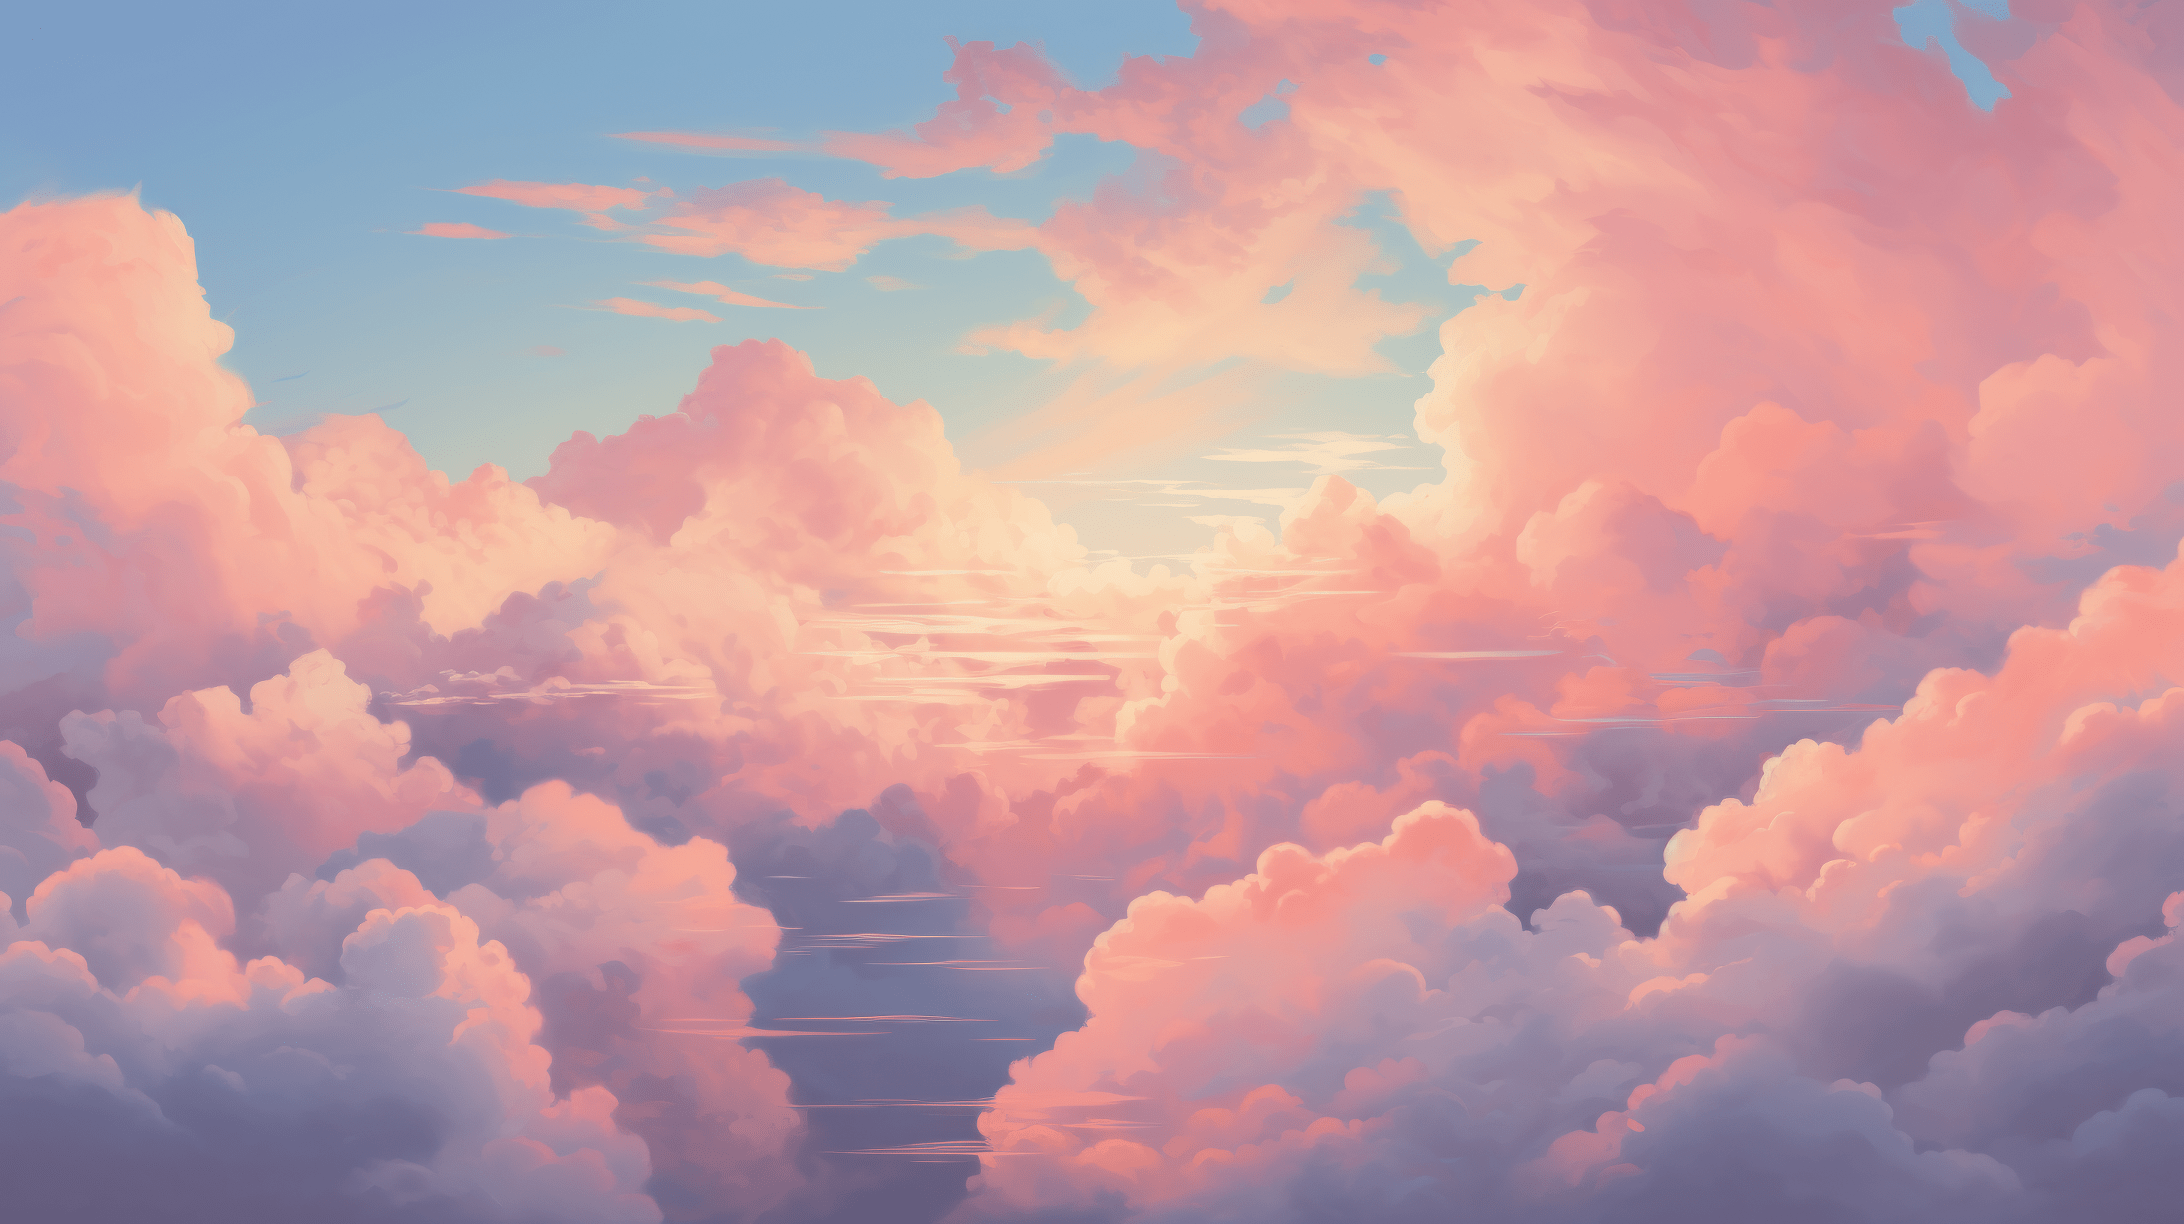 A painting of a pink and blue sky with clouds - Pink, HD, sunrise, cloud, pink phone